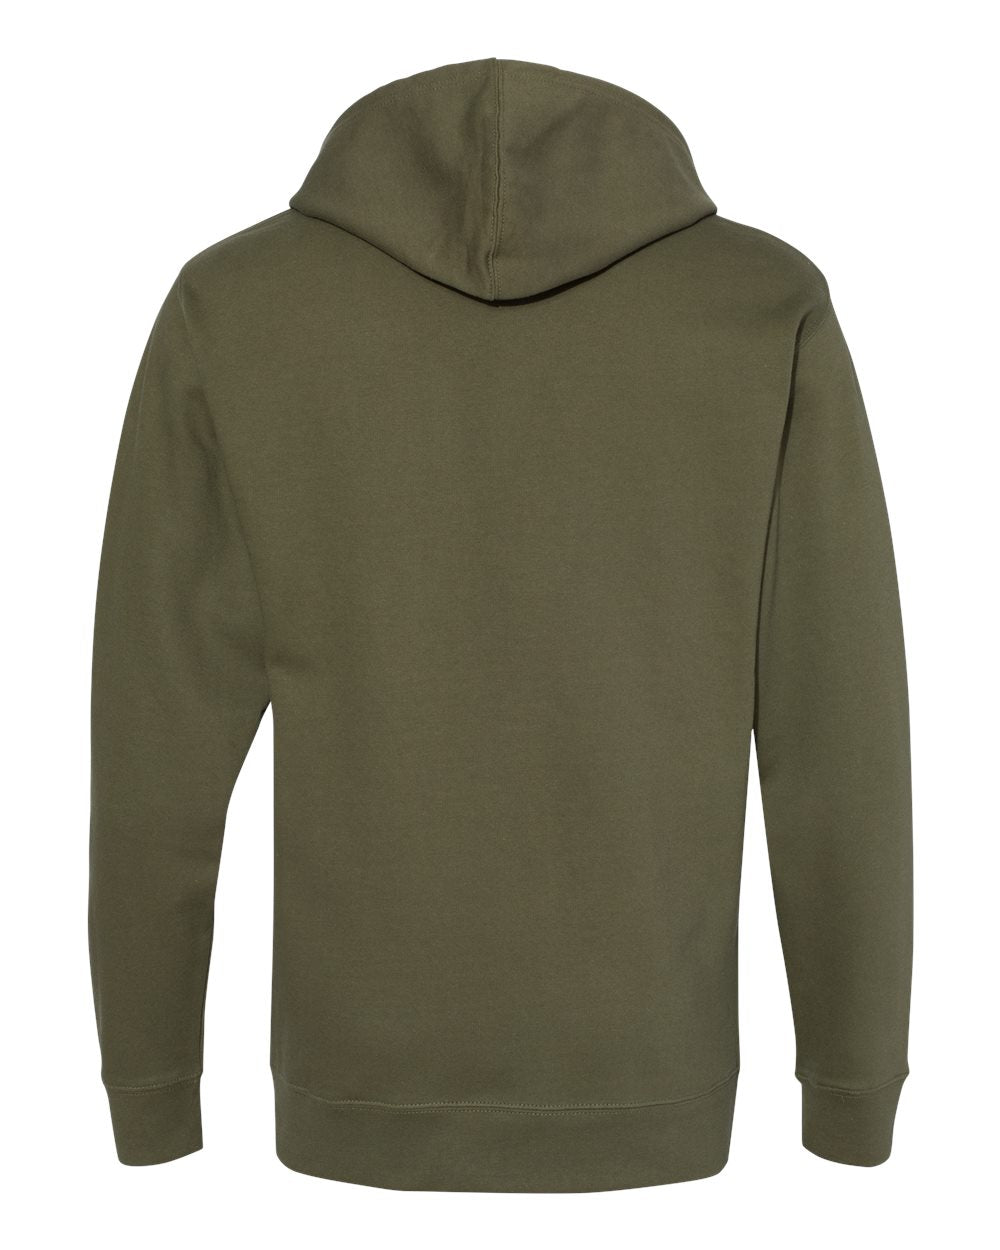 Independent Trading Co. Midweight Hooded Sweatshirt SS4500 #color_Army